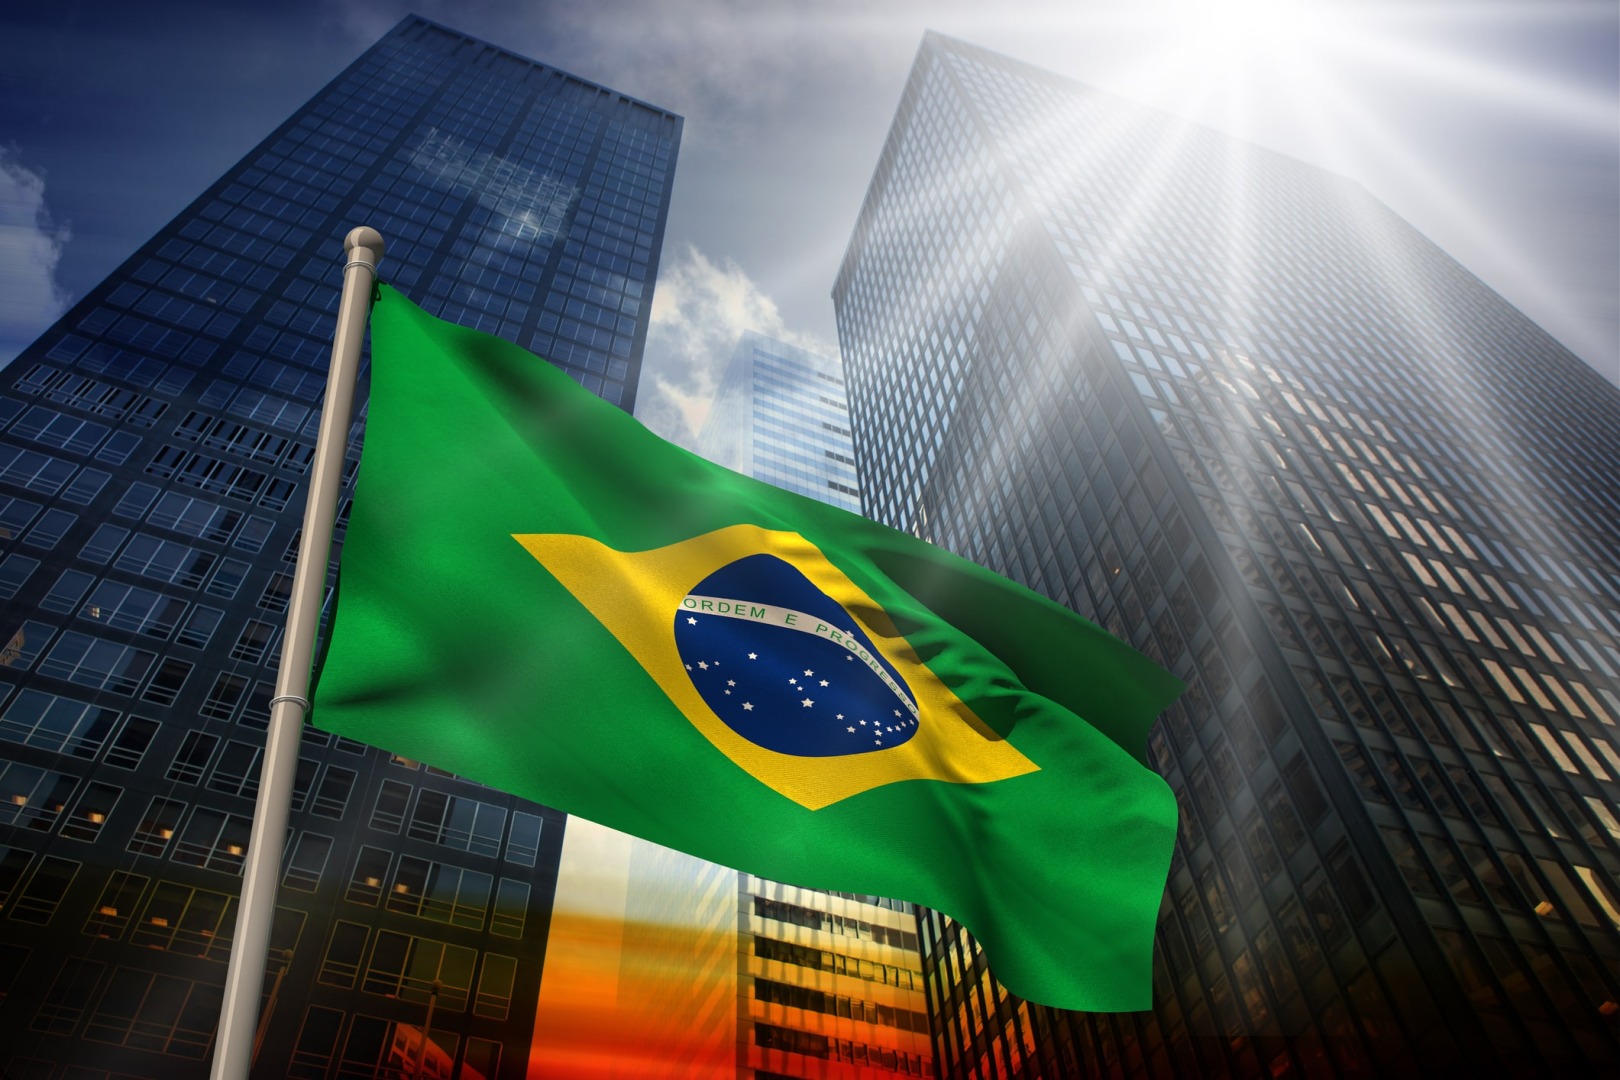 Brazil’s Pix System: Electronic Payments for 67% in a Year